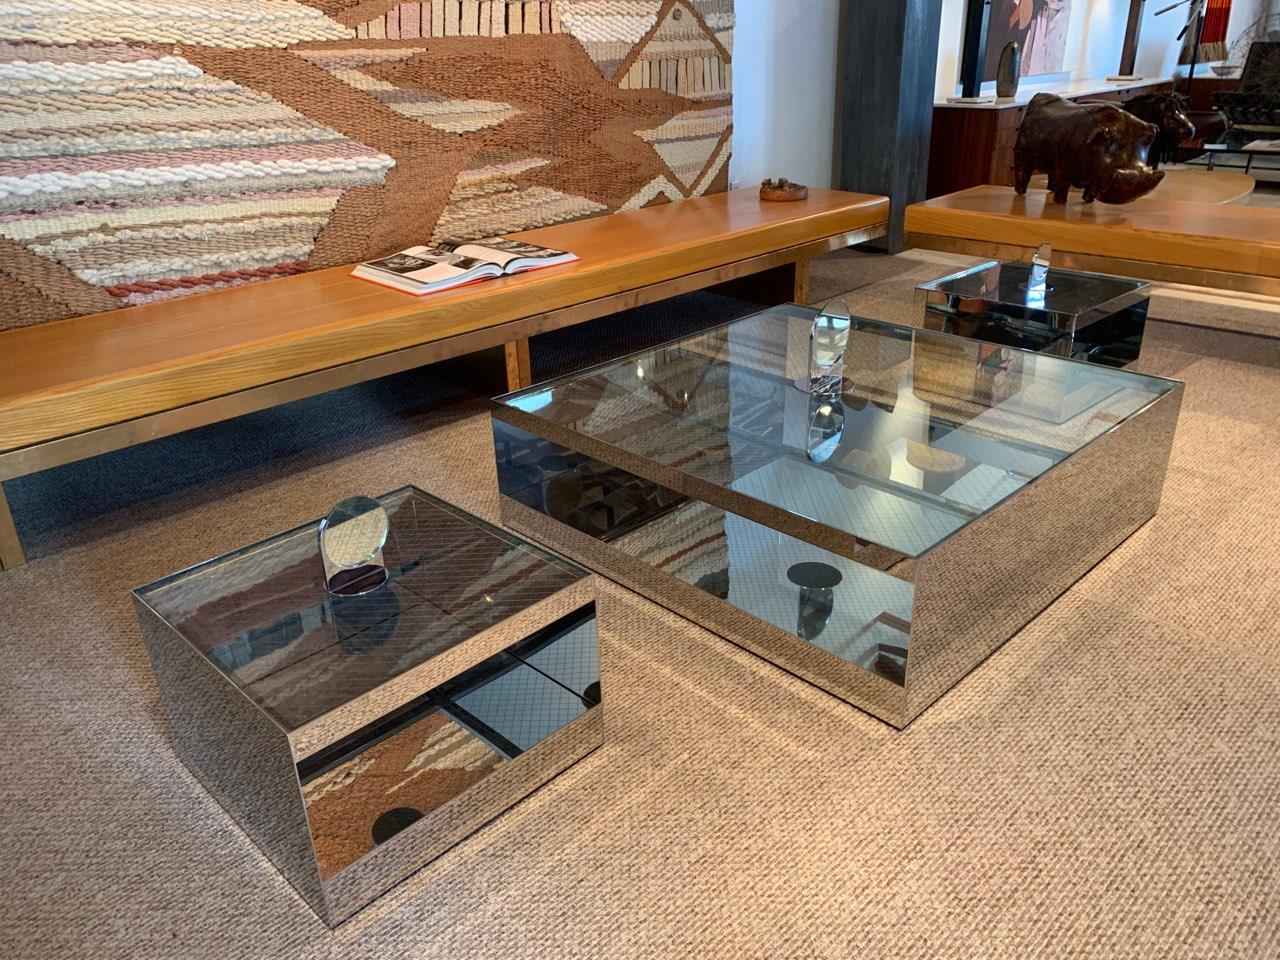 Low rolling coffee table Model 6048T designed by legendary Joeseph D'Urso for Knoll - 1981. Constructed of mirror polished stainless steel and diamond wire safety glass on hidden castors. Table is in excellent condition with the original safety